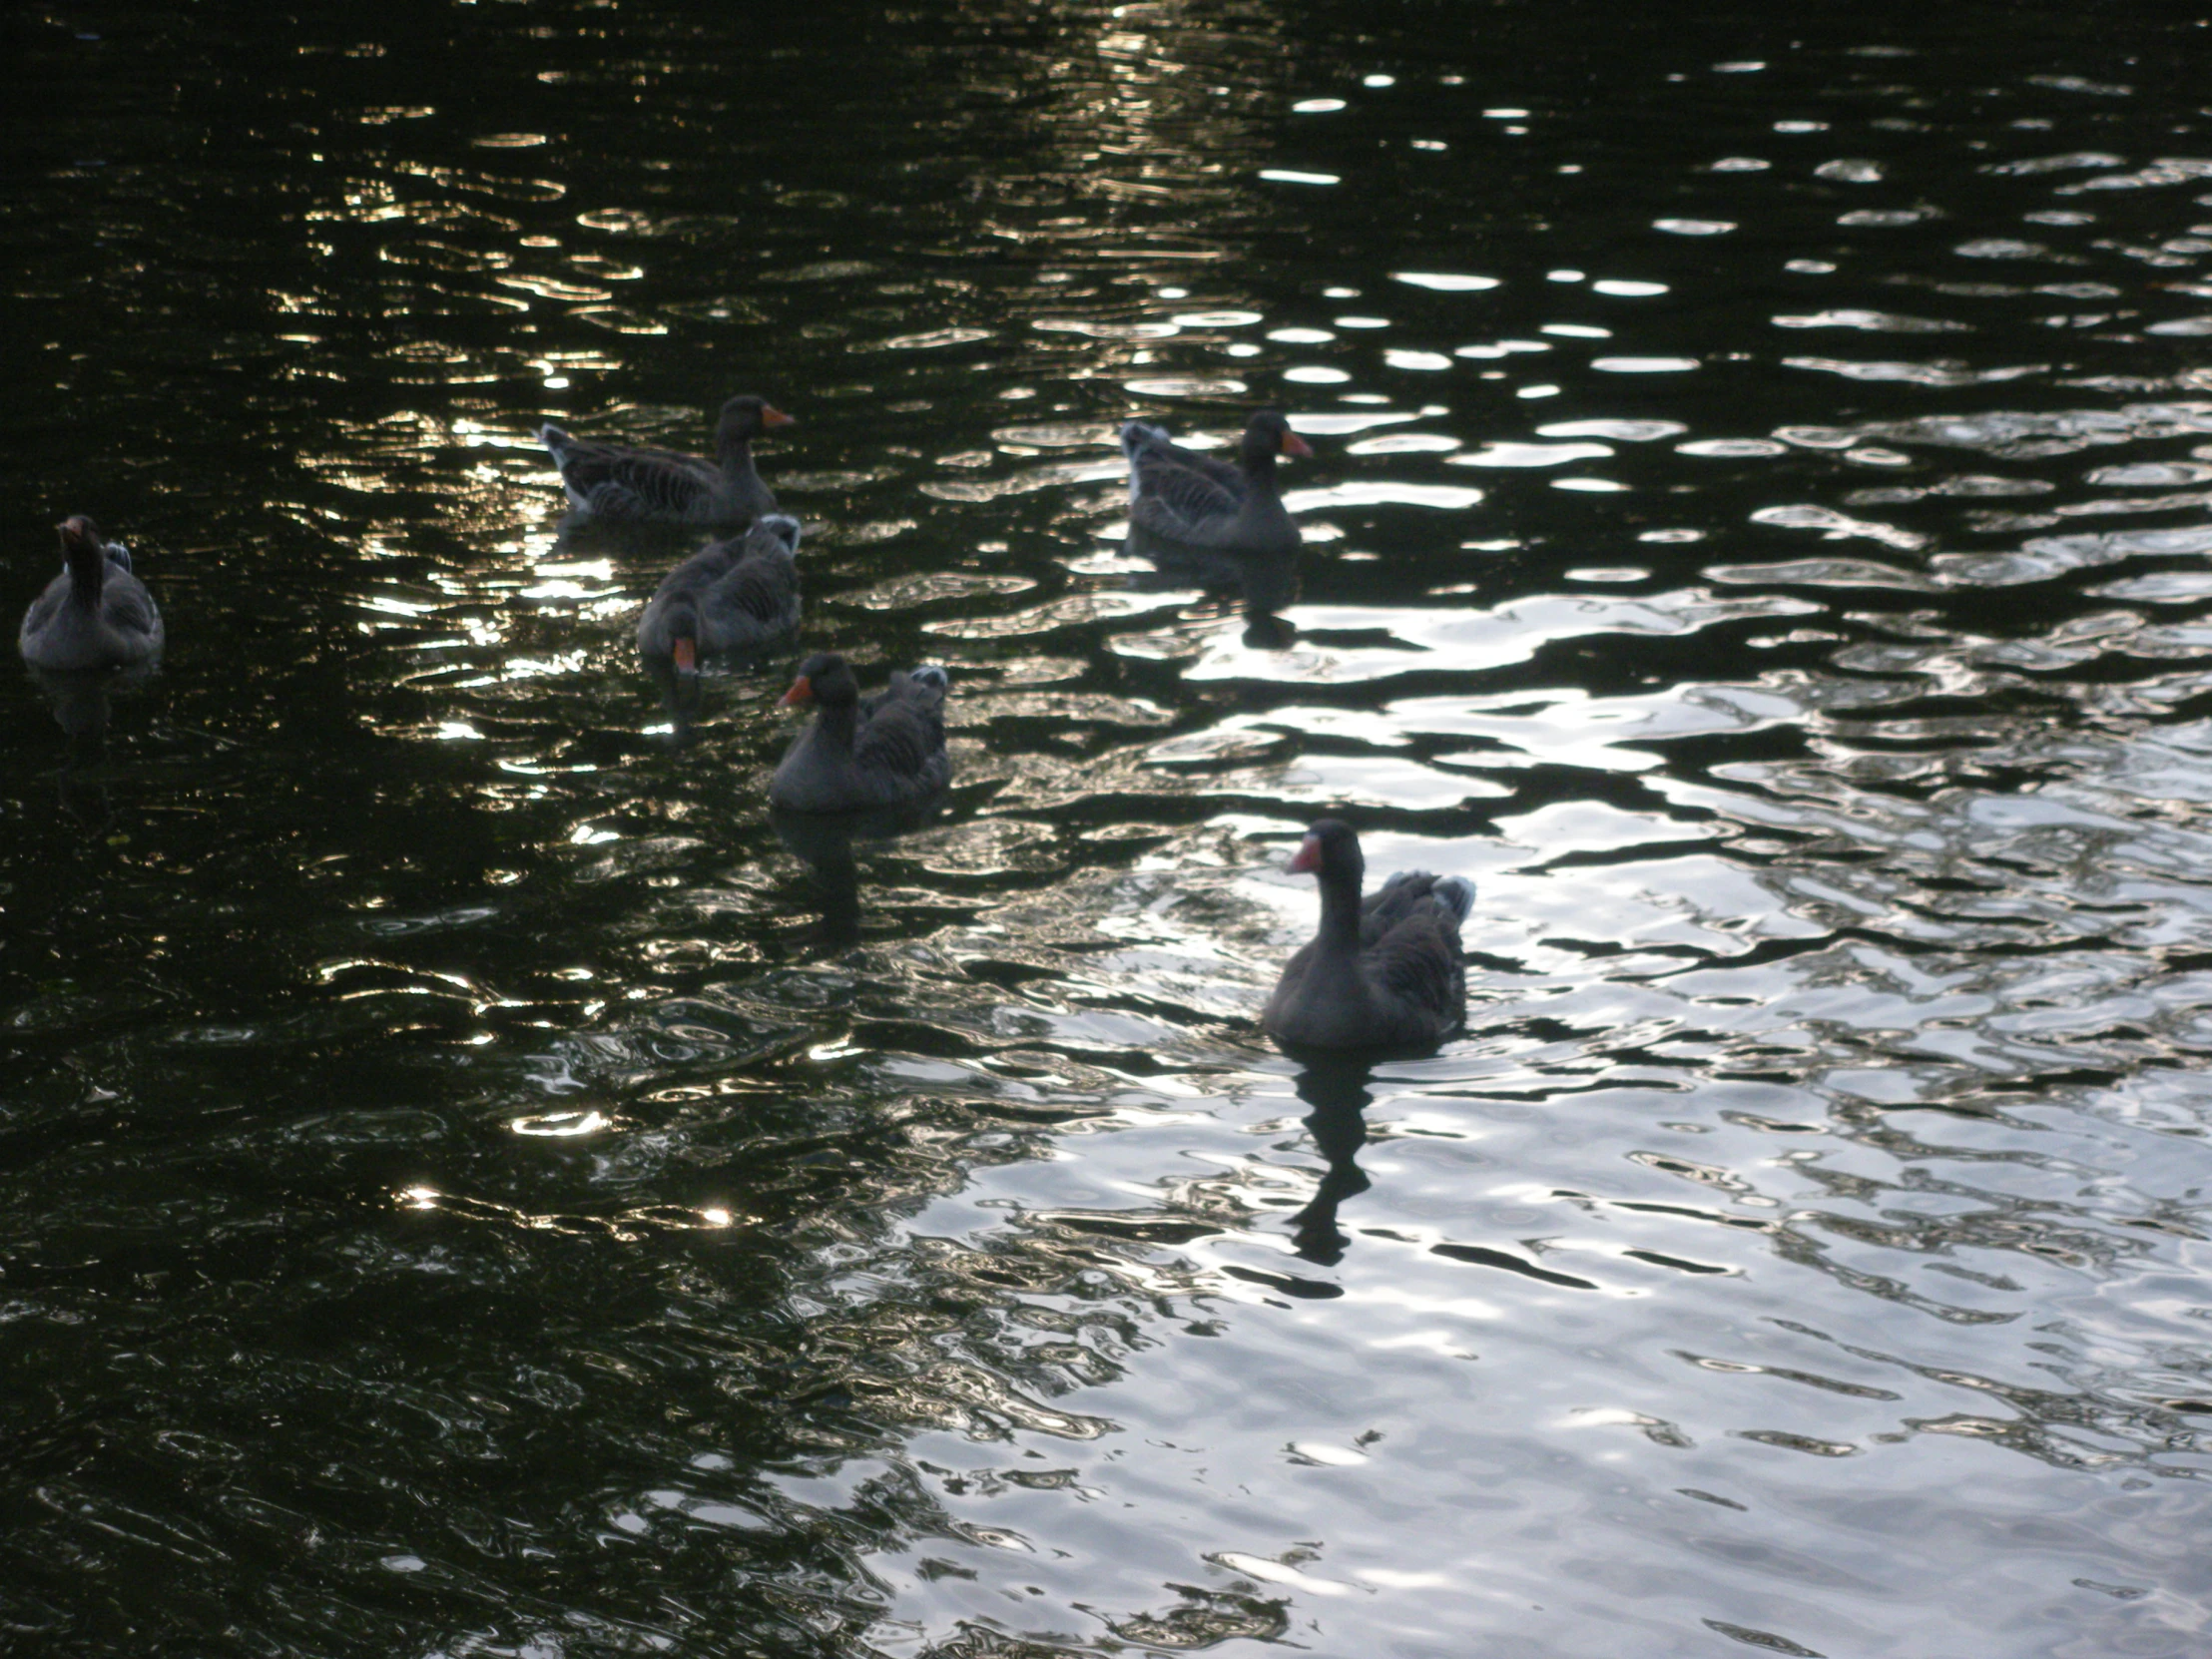 several ducks that are in the water together